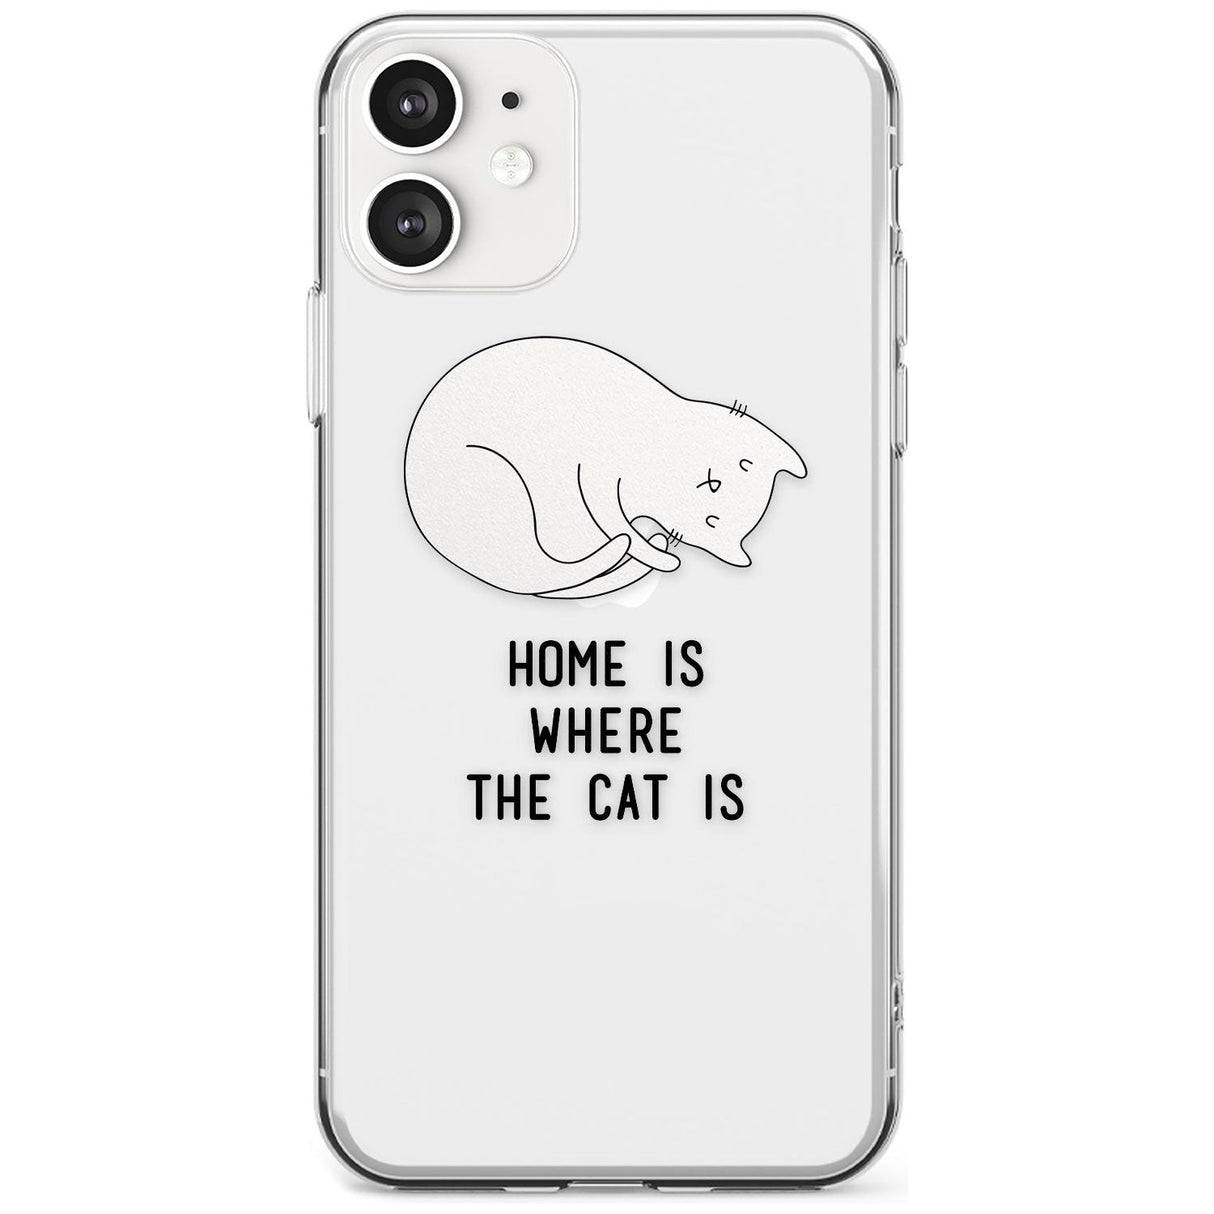 Home Is Where the Cat is Black Impact Phone Case for iPhone 11